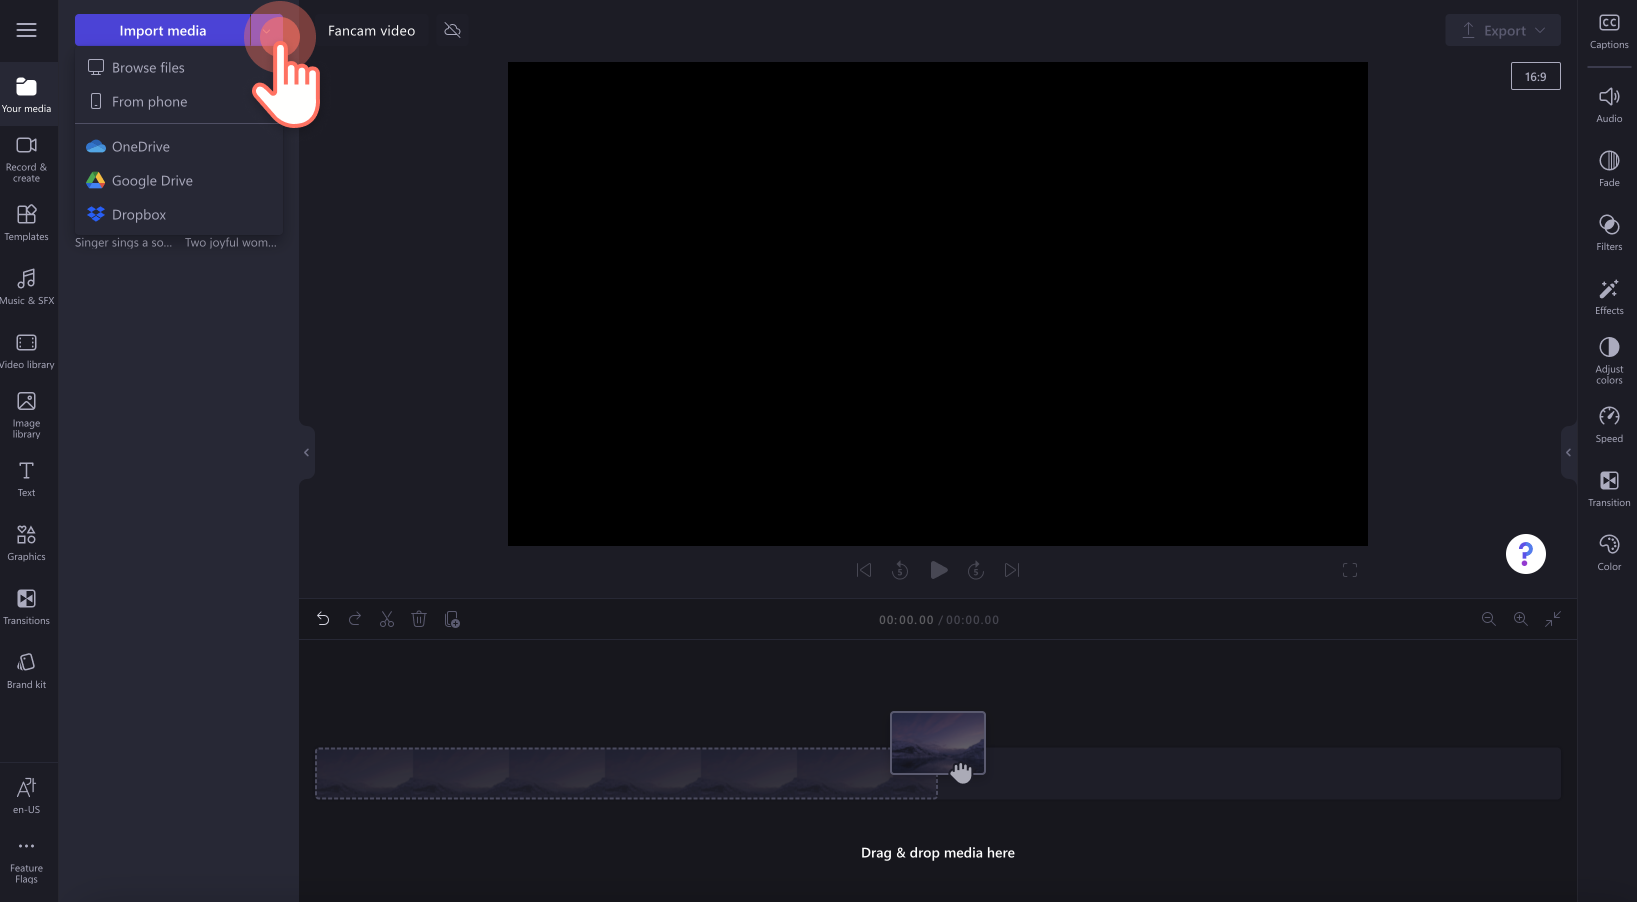 An image of a user importing video.